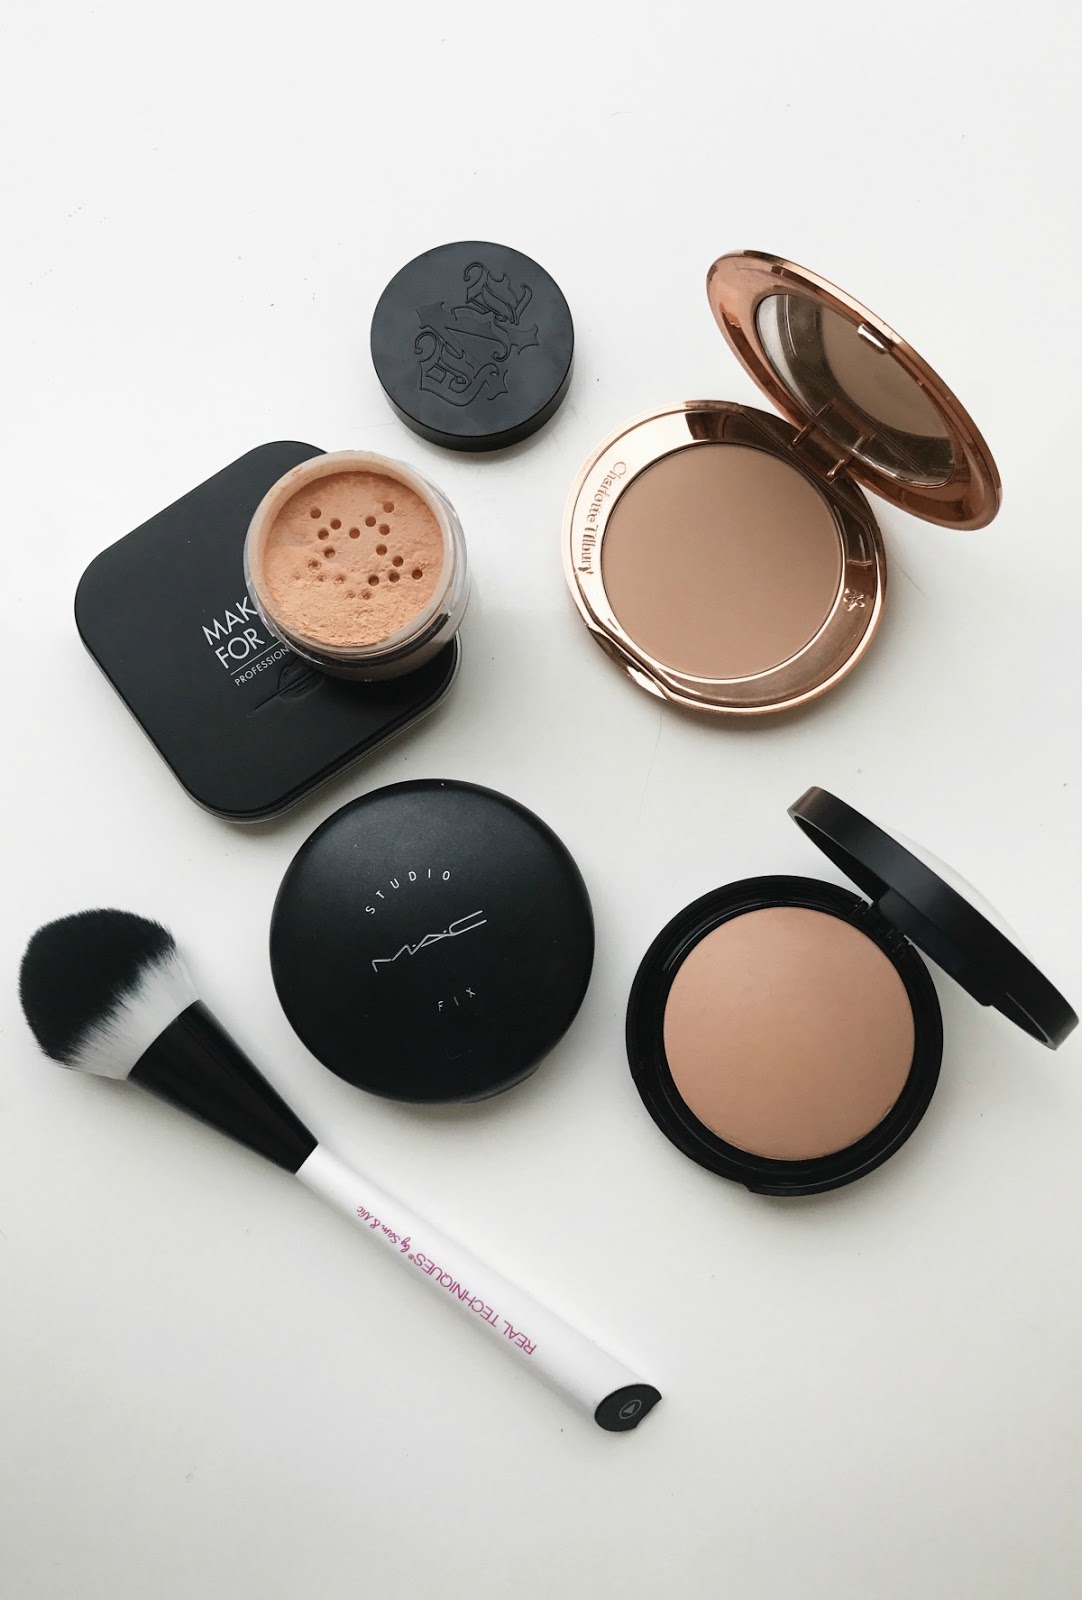 A Face Powder For Every Skin Type, Concern and Tone